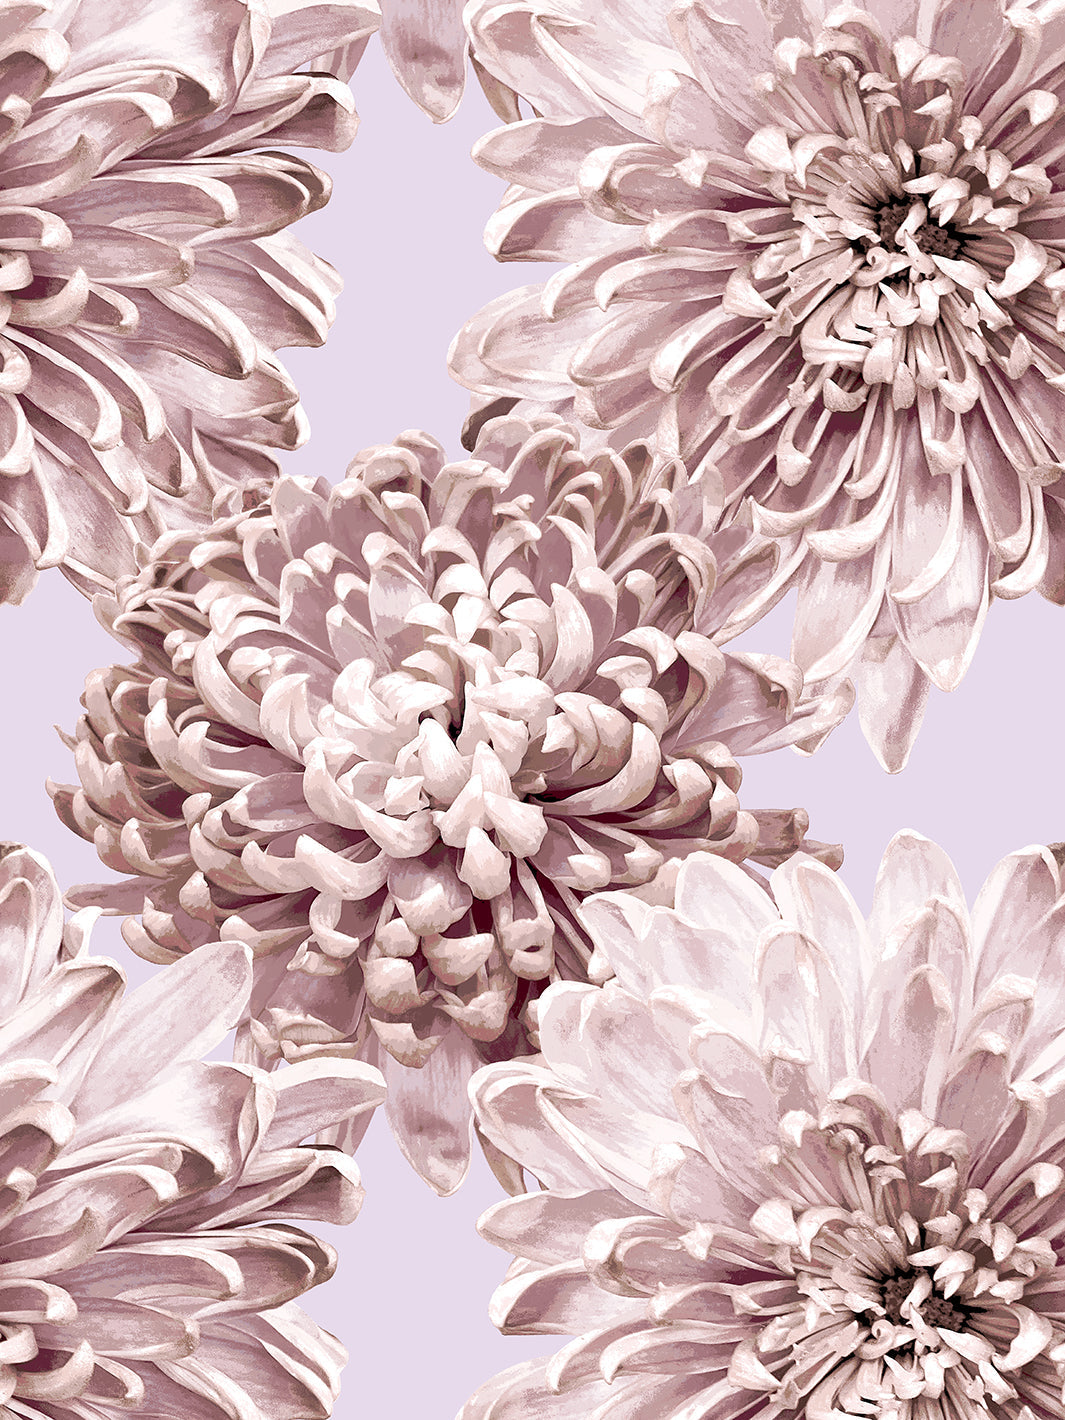 'The Mums' Wallpaper by Sarah Jessica Parker - Lavender